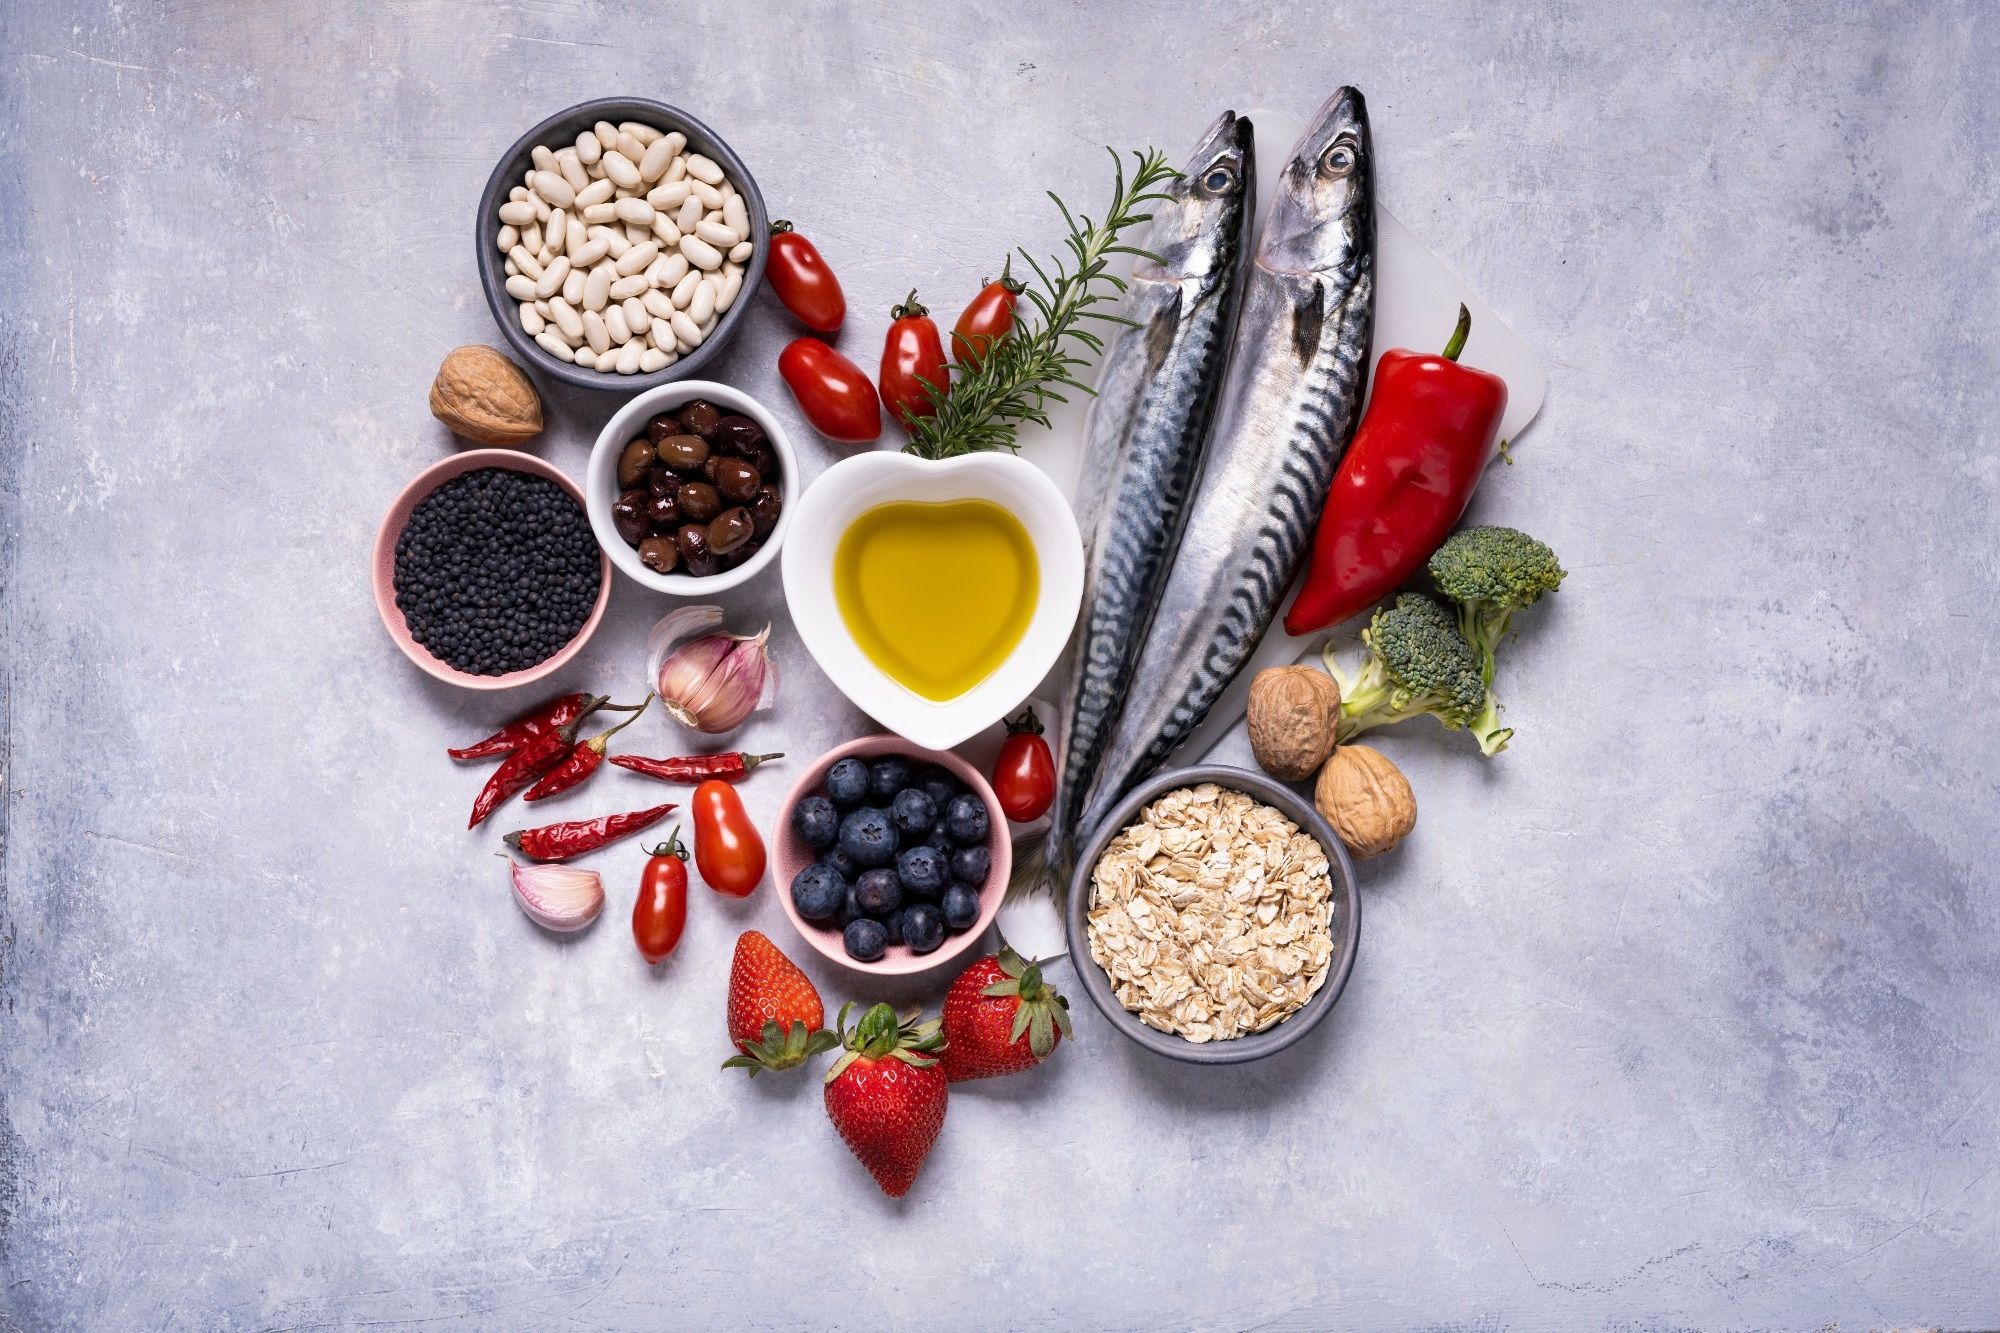 Study: Exploring the Effects of a Mediterranean Diet and Weight Loss on the Gut Microbiome and Cognitive Performance in Older, African American Obese Adults: A Post Hoc Analysis. Image Credit: luigigiordano/Shutterstock.com